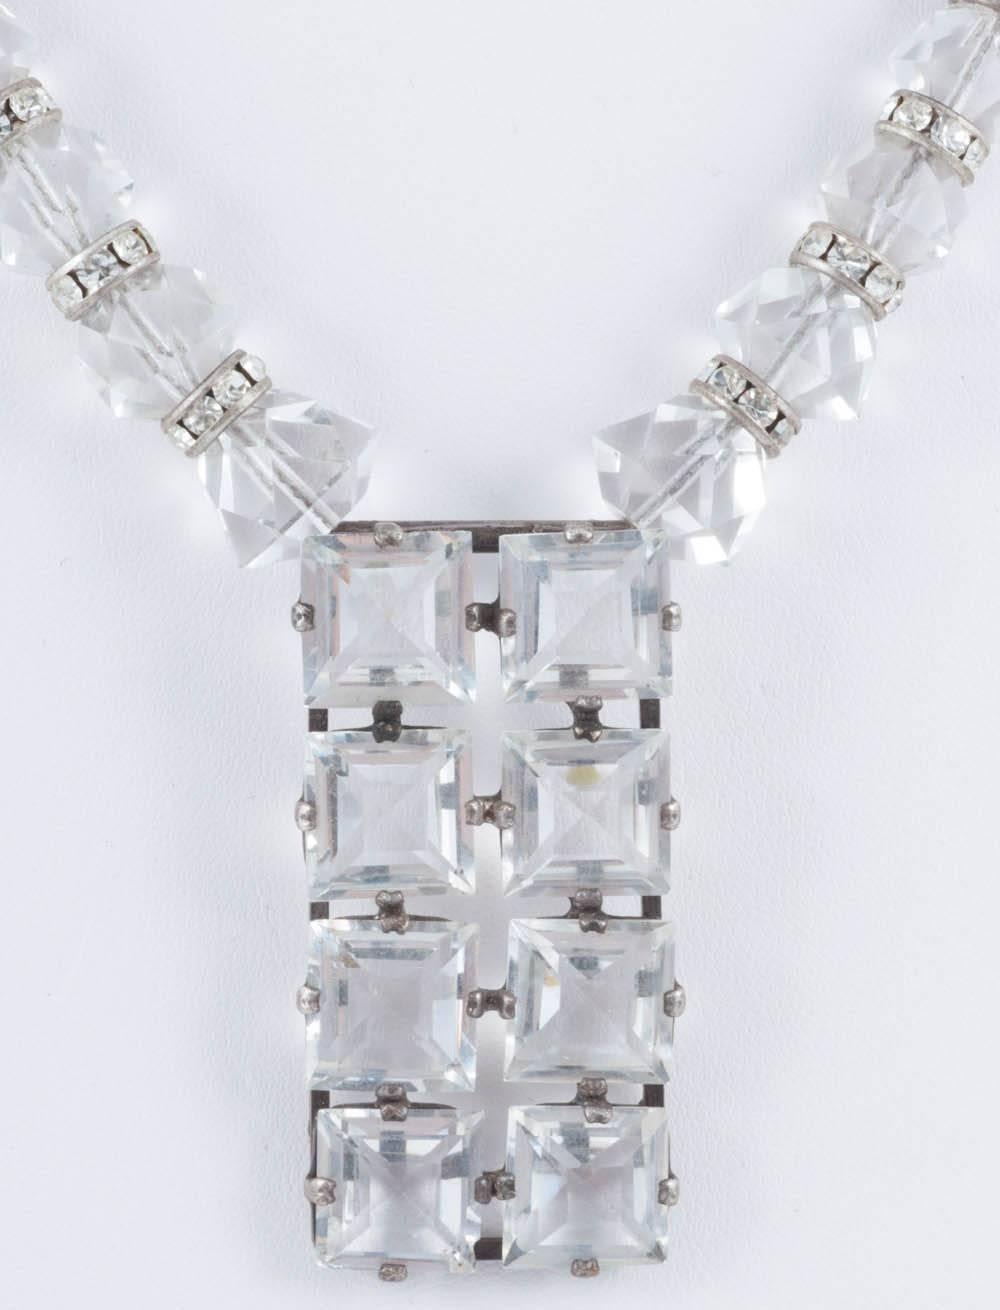 This is a lovely 1930s necklace featuring paste roundels interspersing cut crystal beads and a very geometric cut glass pendant. This necklace is a good length and a strong look whilst the limited palette makes it wearable year round, day to